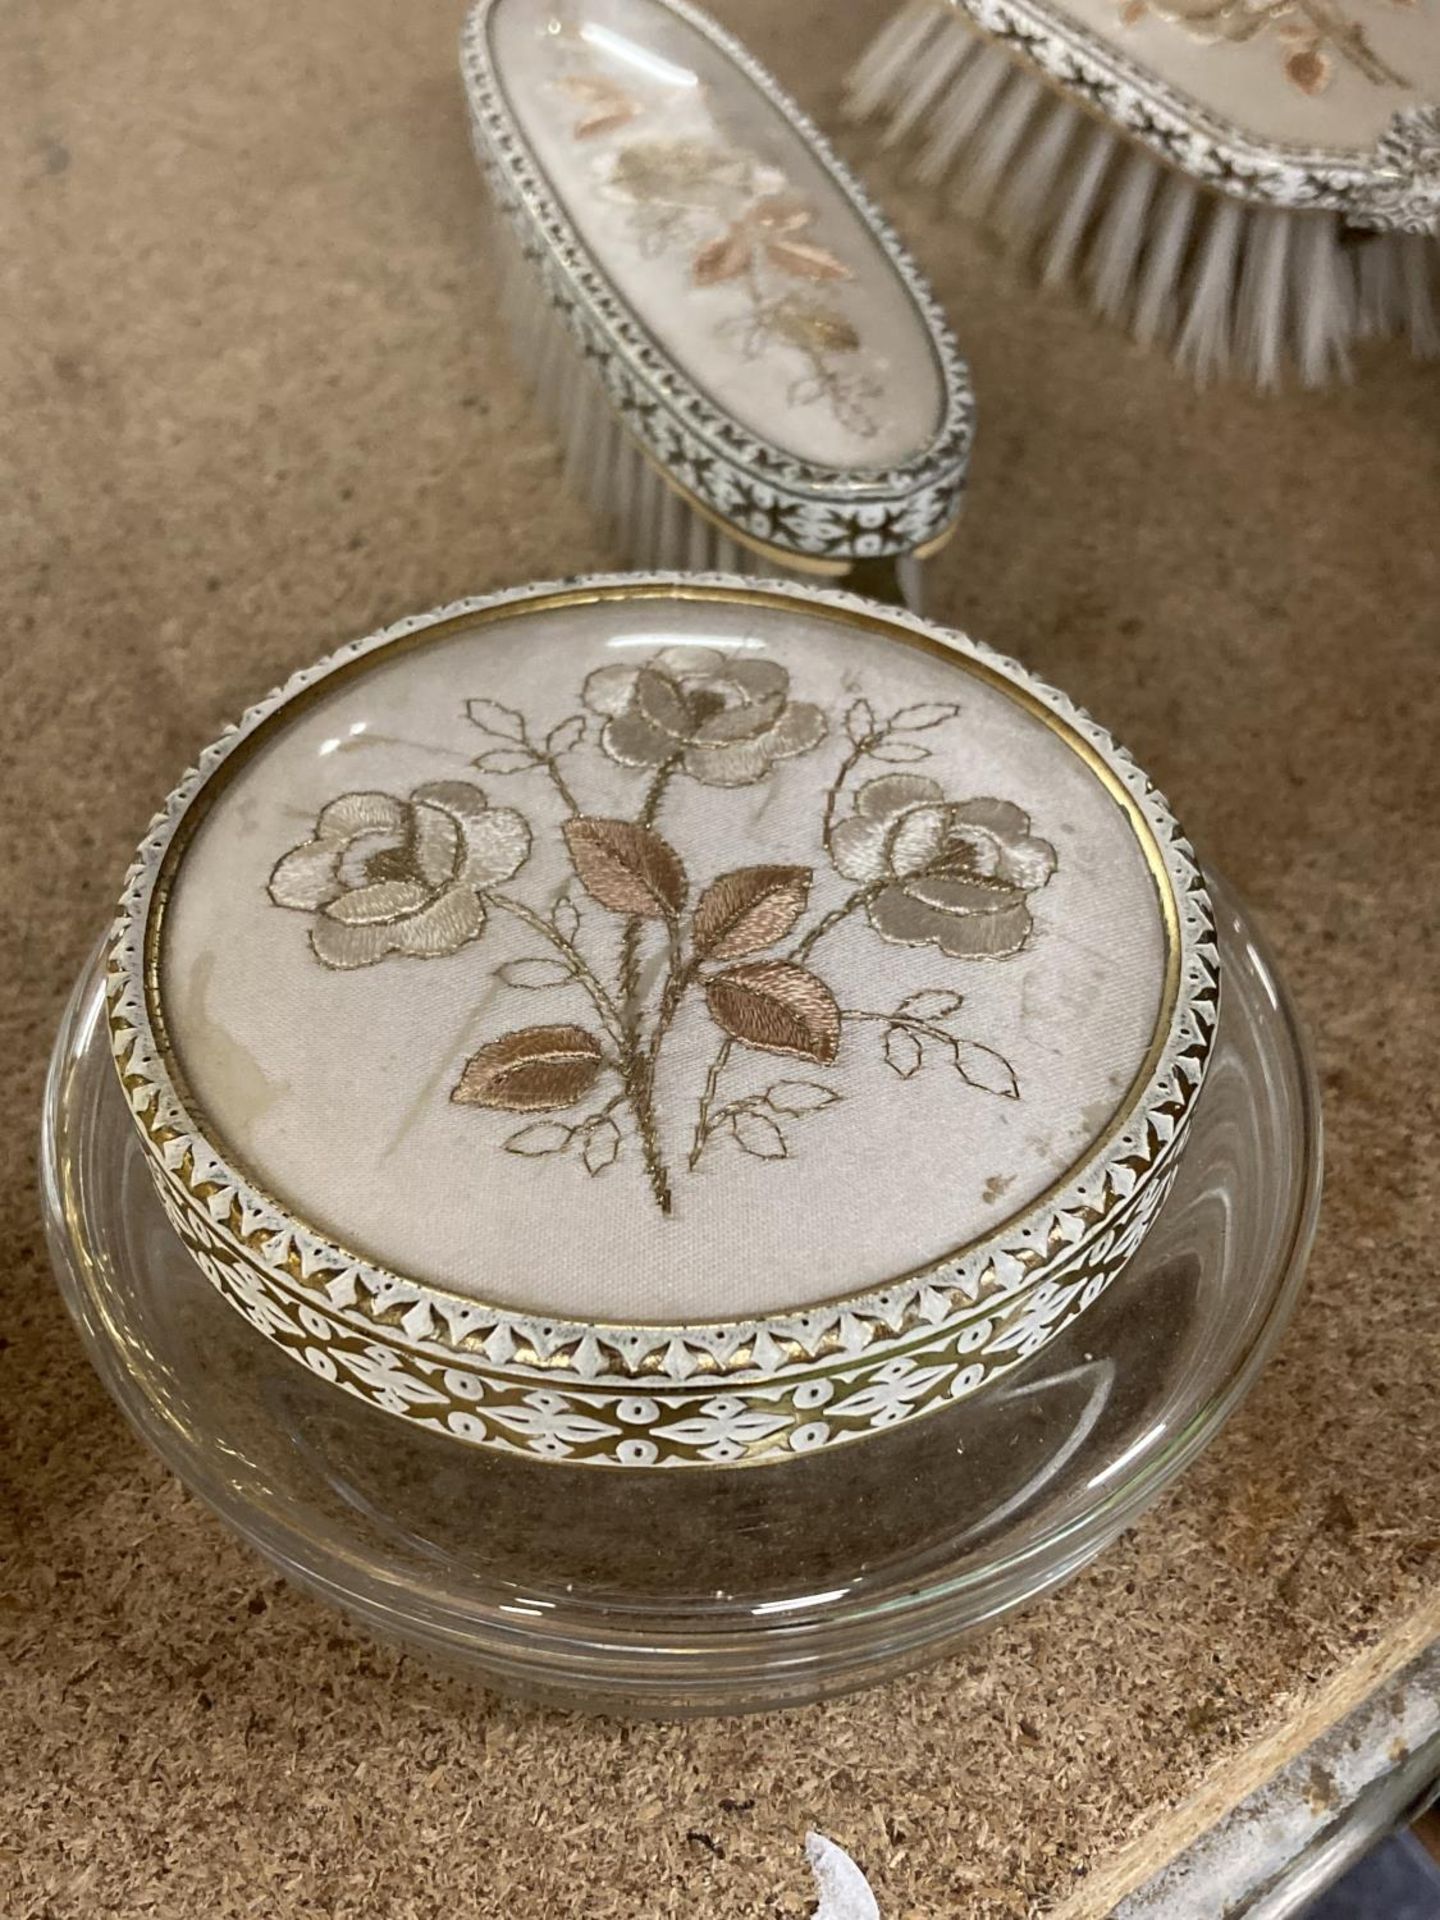 A VINTAGE VANITY SET WITH FLORAL EMROIDERY - Image 5 of 5